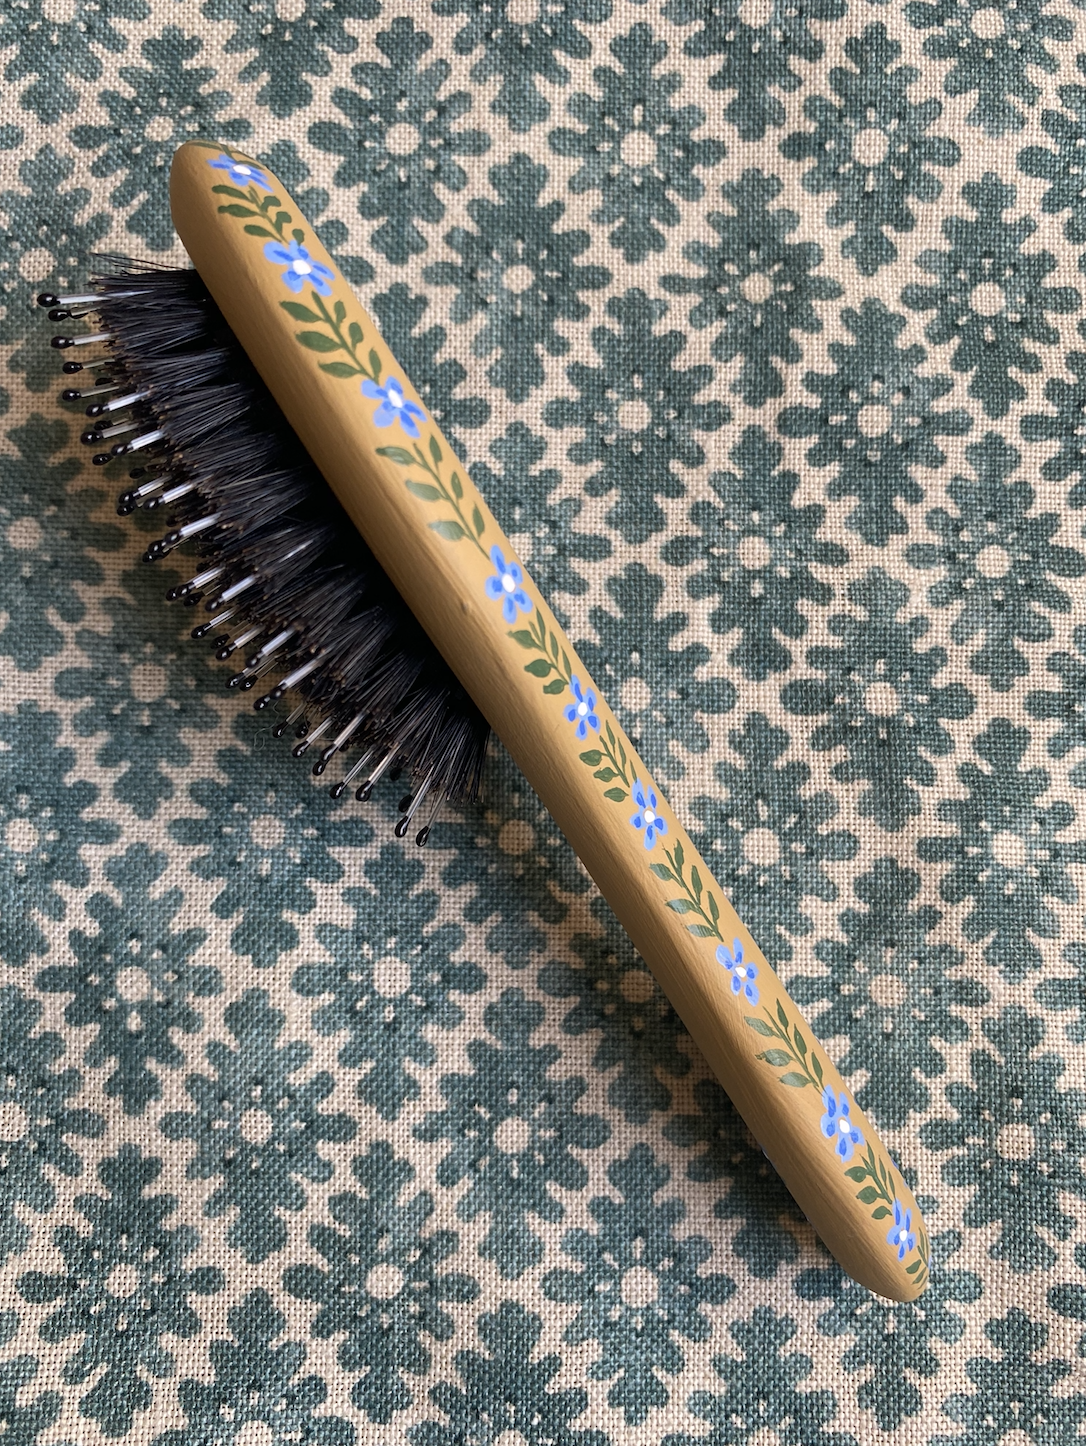 Small hairbrush - Yellow with blue flowers